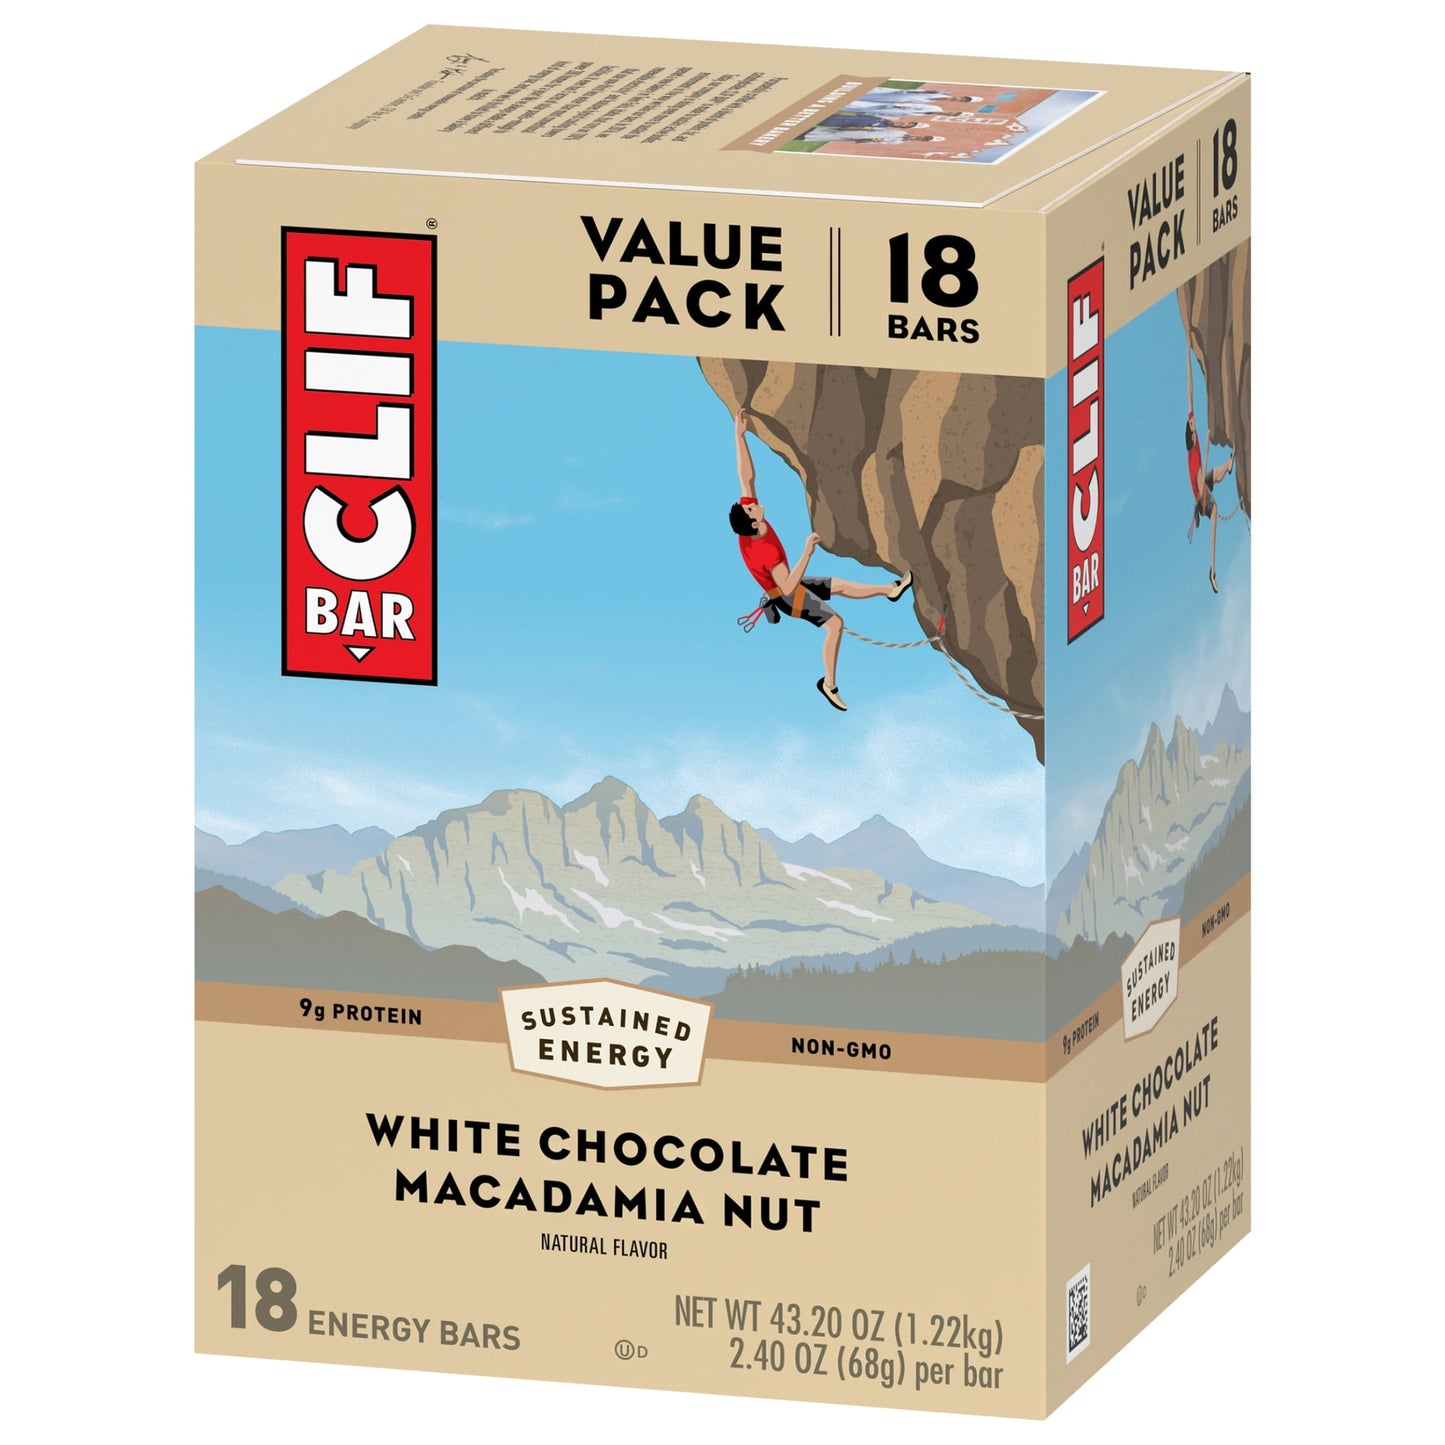 - White Chocolate Macadamia Nut Flavor - Made with Organic Oats - 9G Protein - Non-Gmo - Plant Based - Energy Bars - 2.4 Oz. (18 Pack)